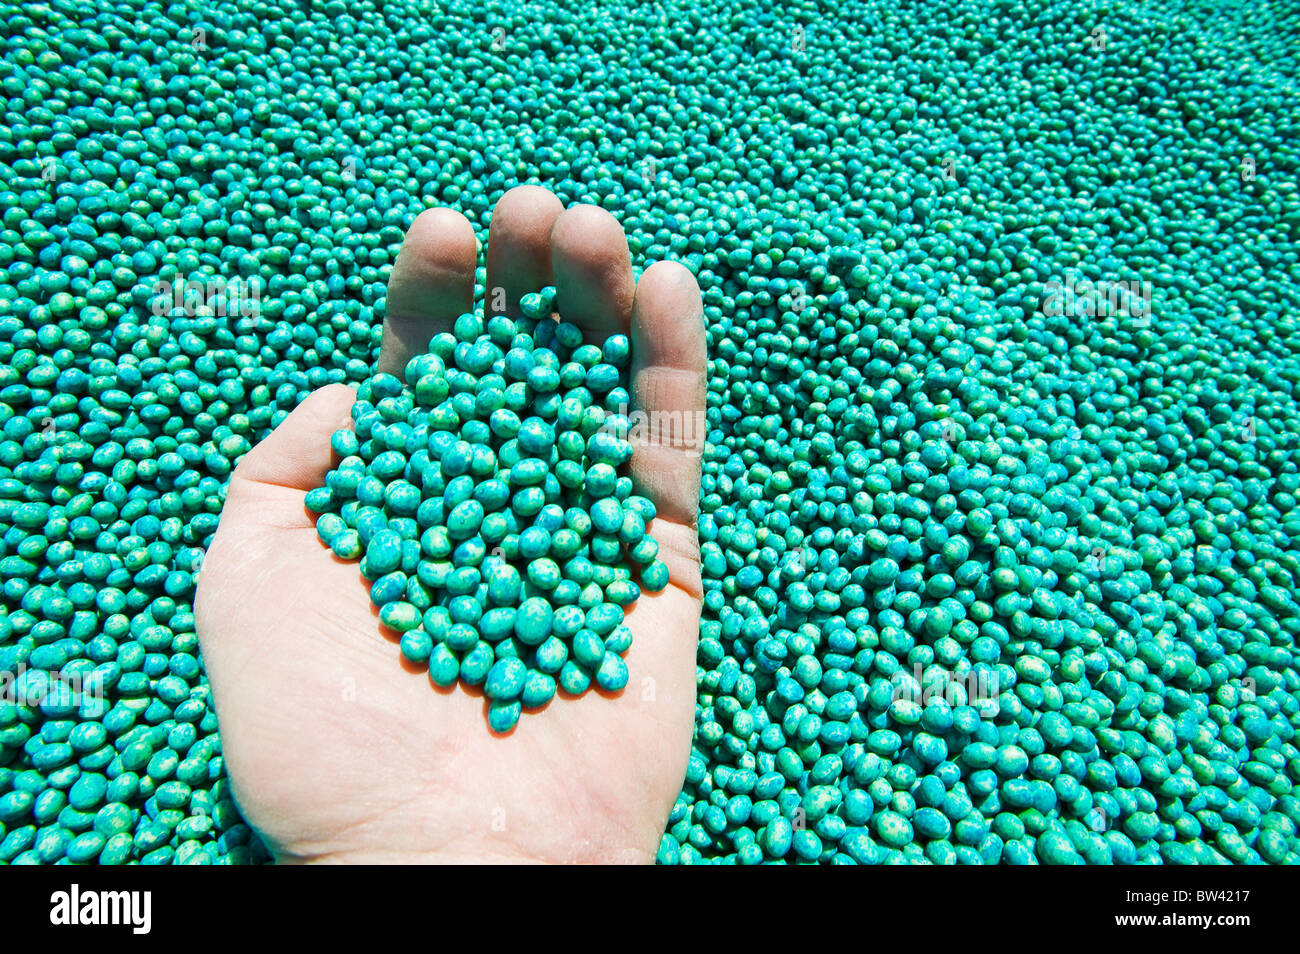 Close-up of hand holding treated soybean seeds Stock Photo